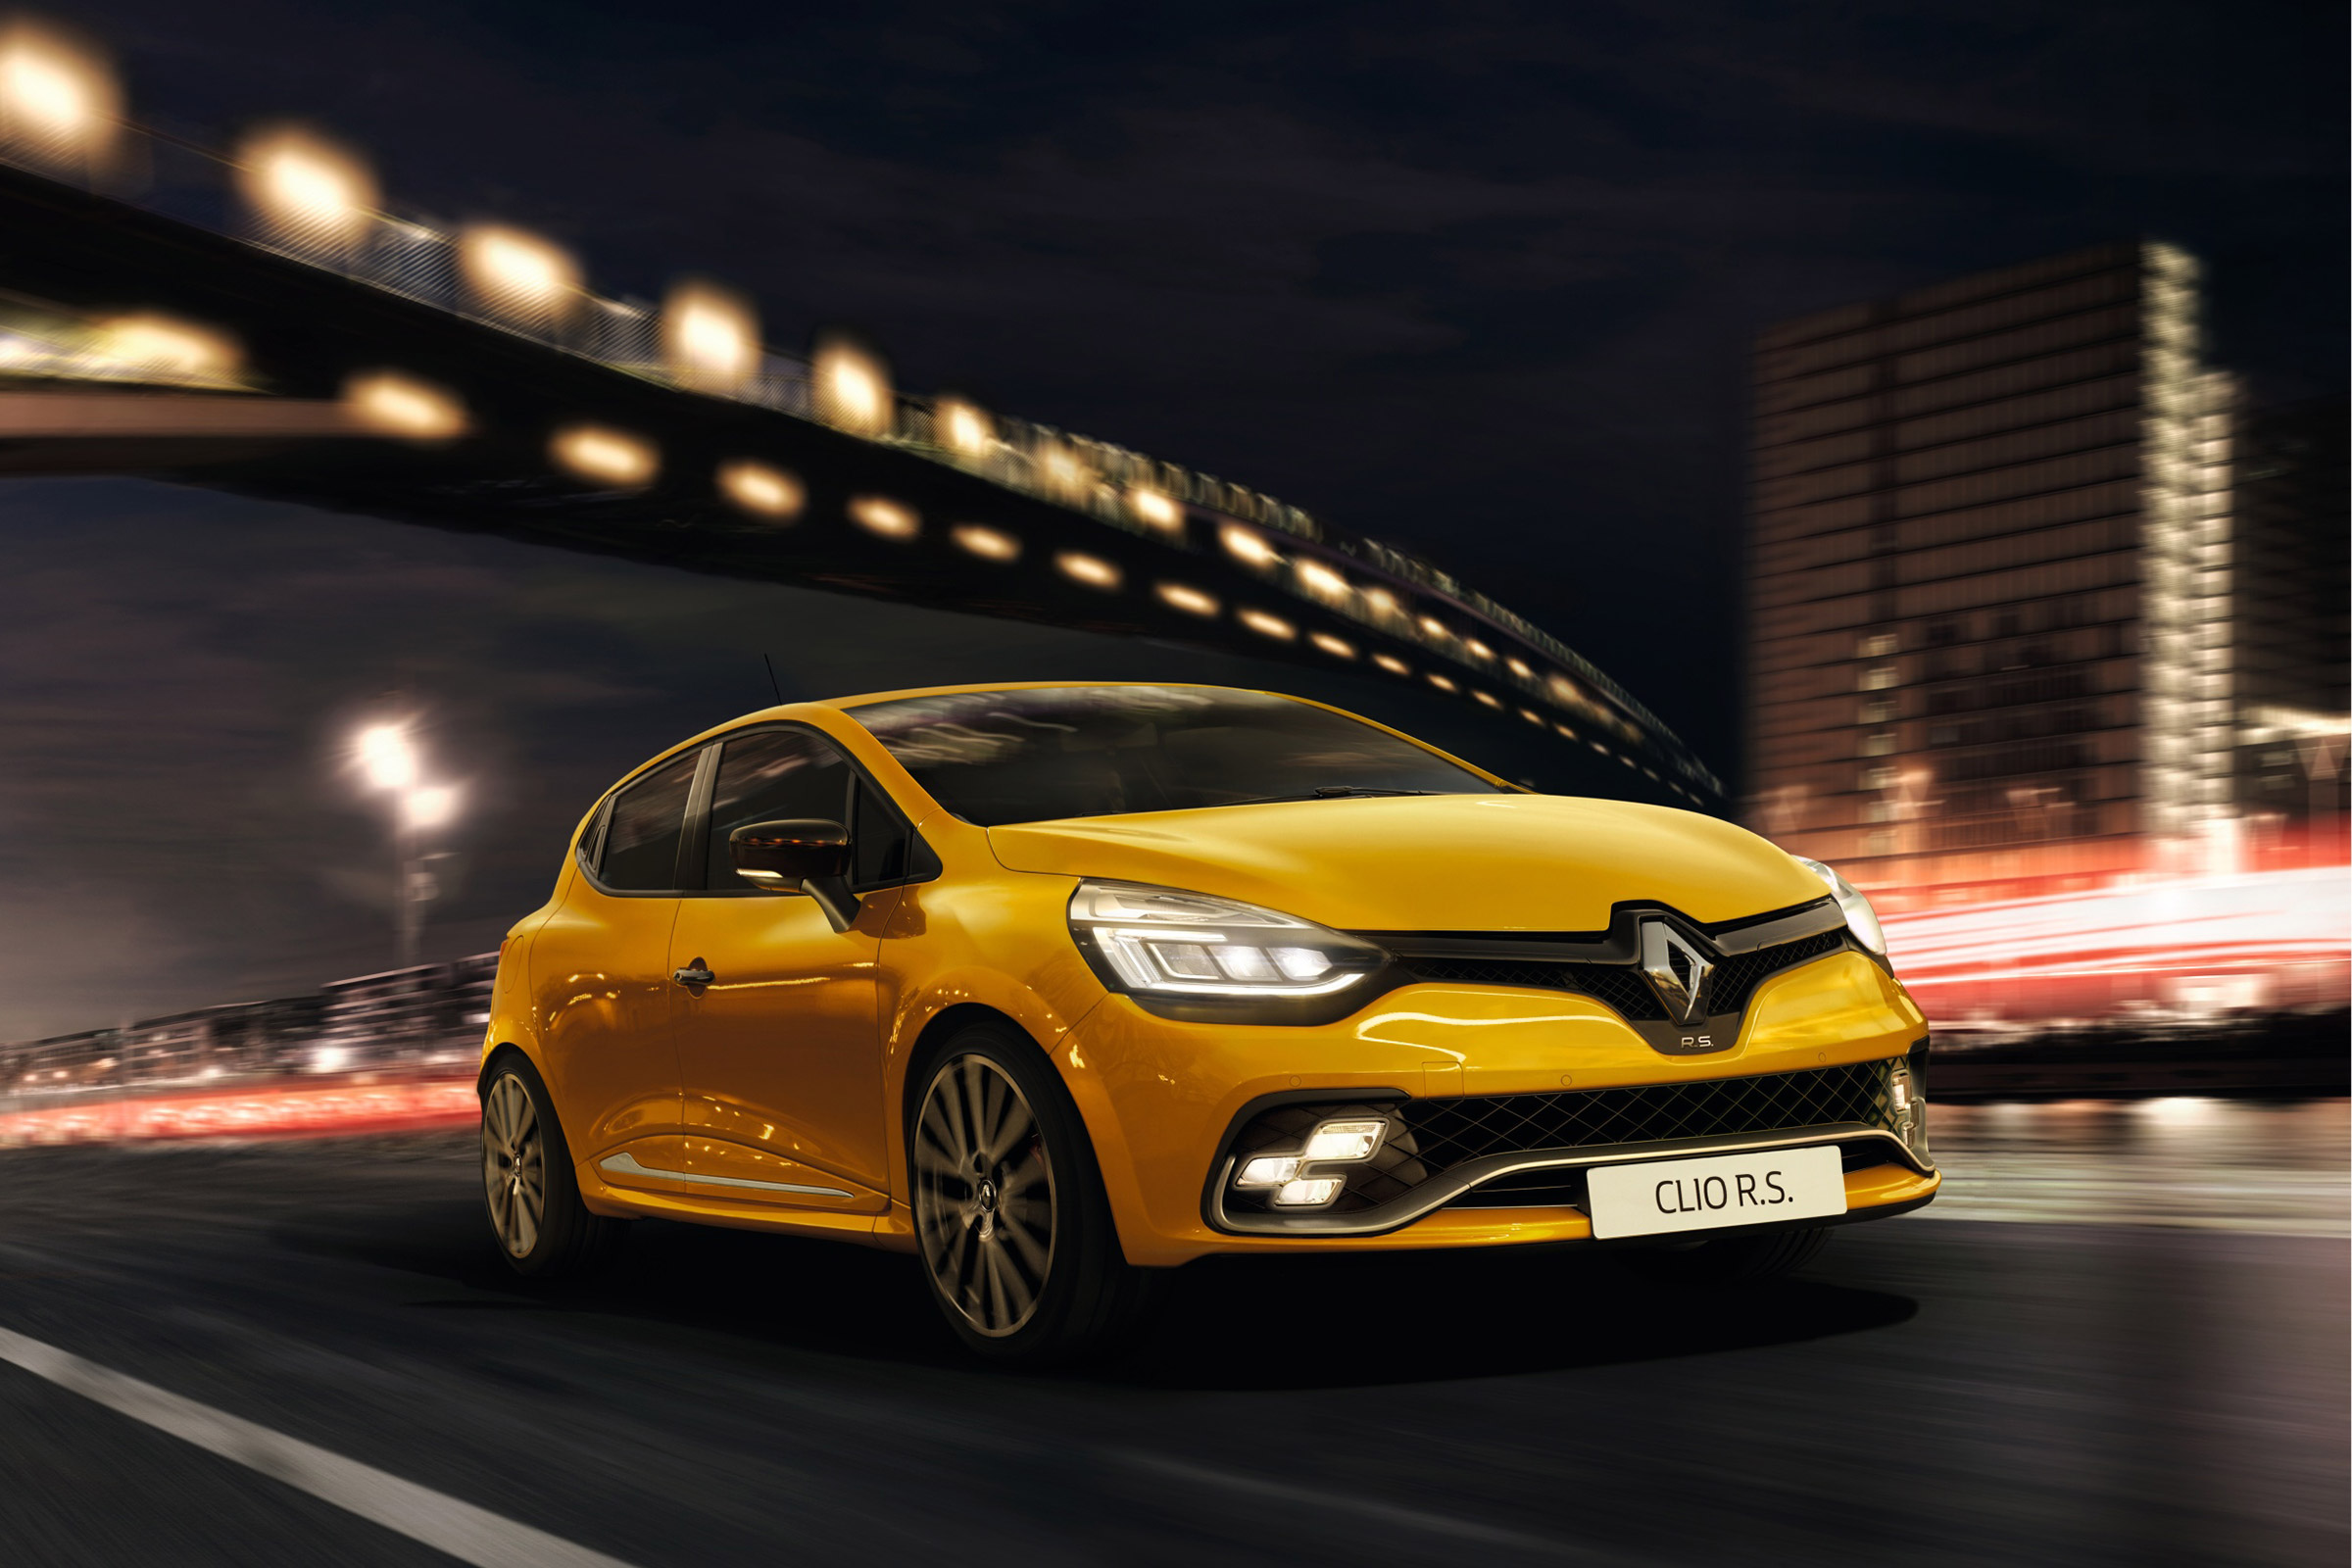 New 2016 Renault Clio Renaultsport Hot Hatch Ready For Launch Auto